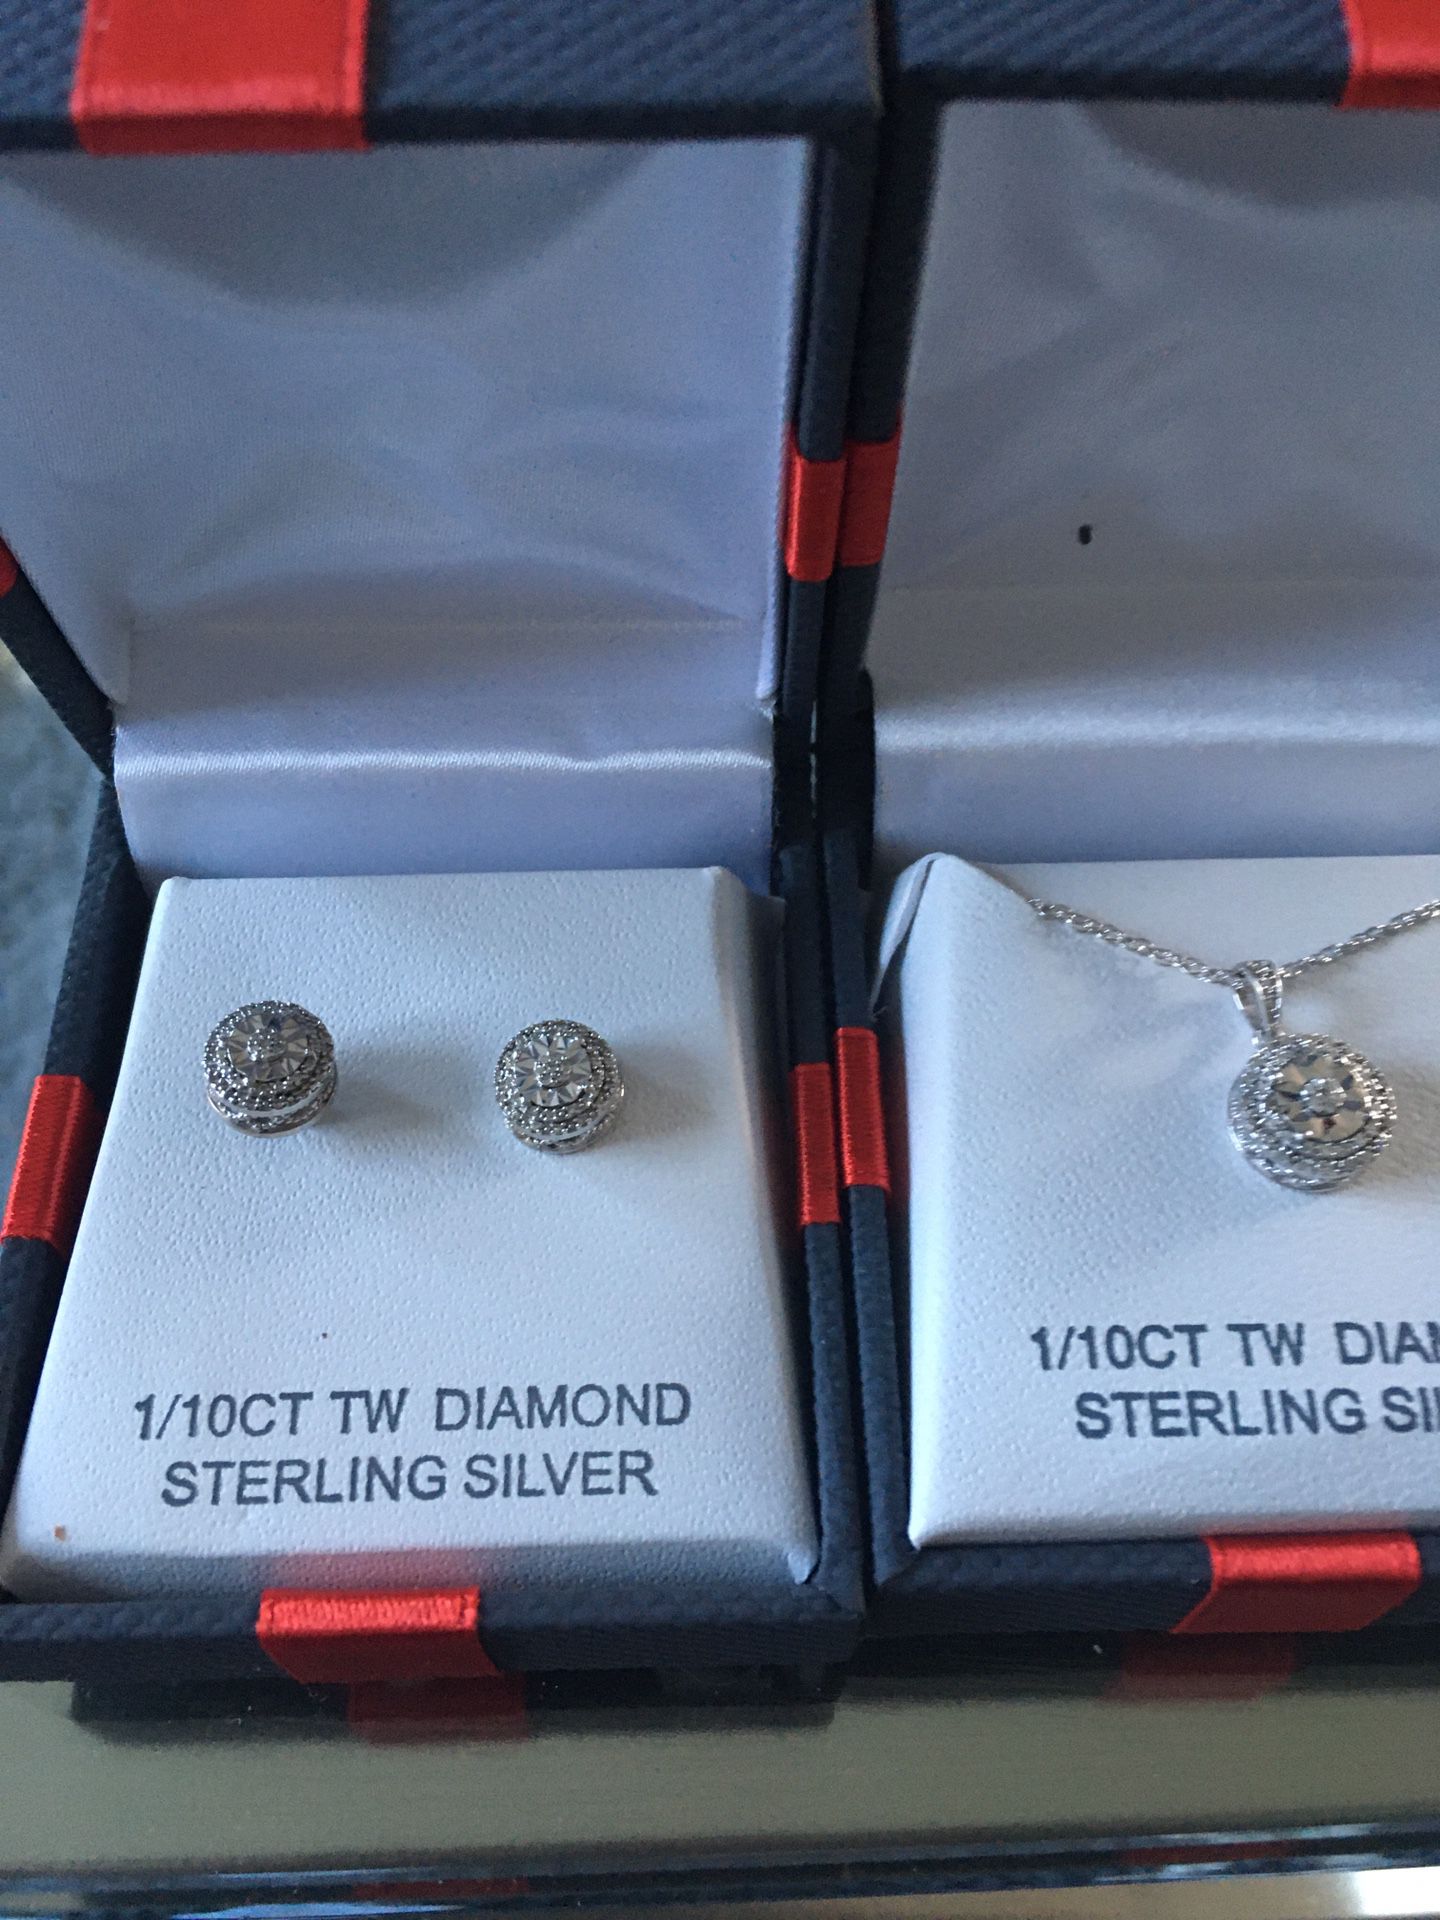 Diamond necklace and earrings